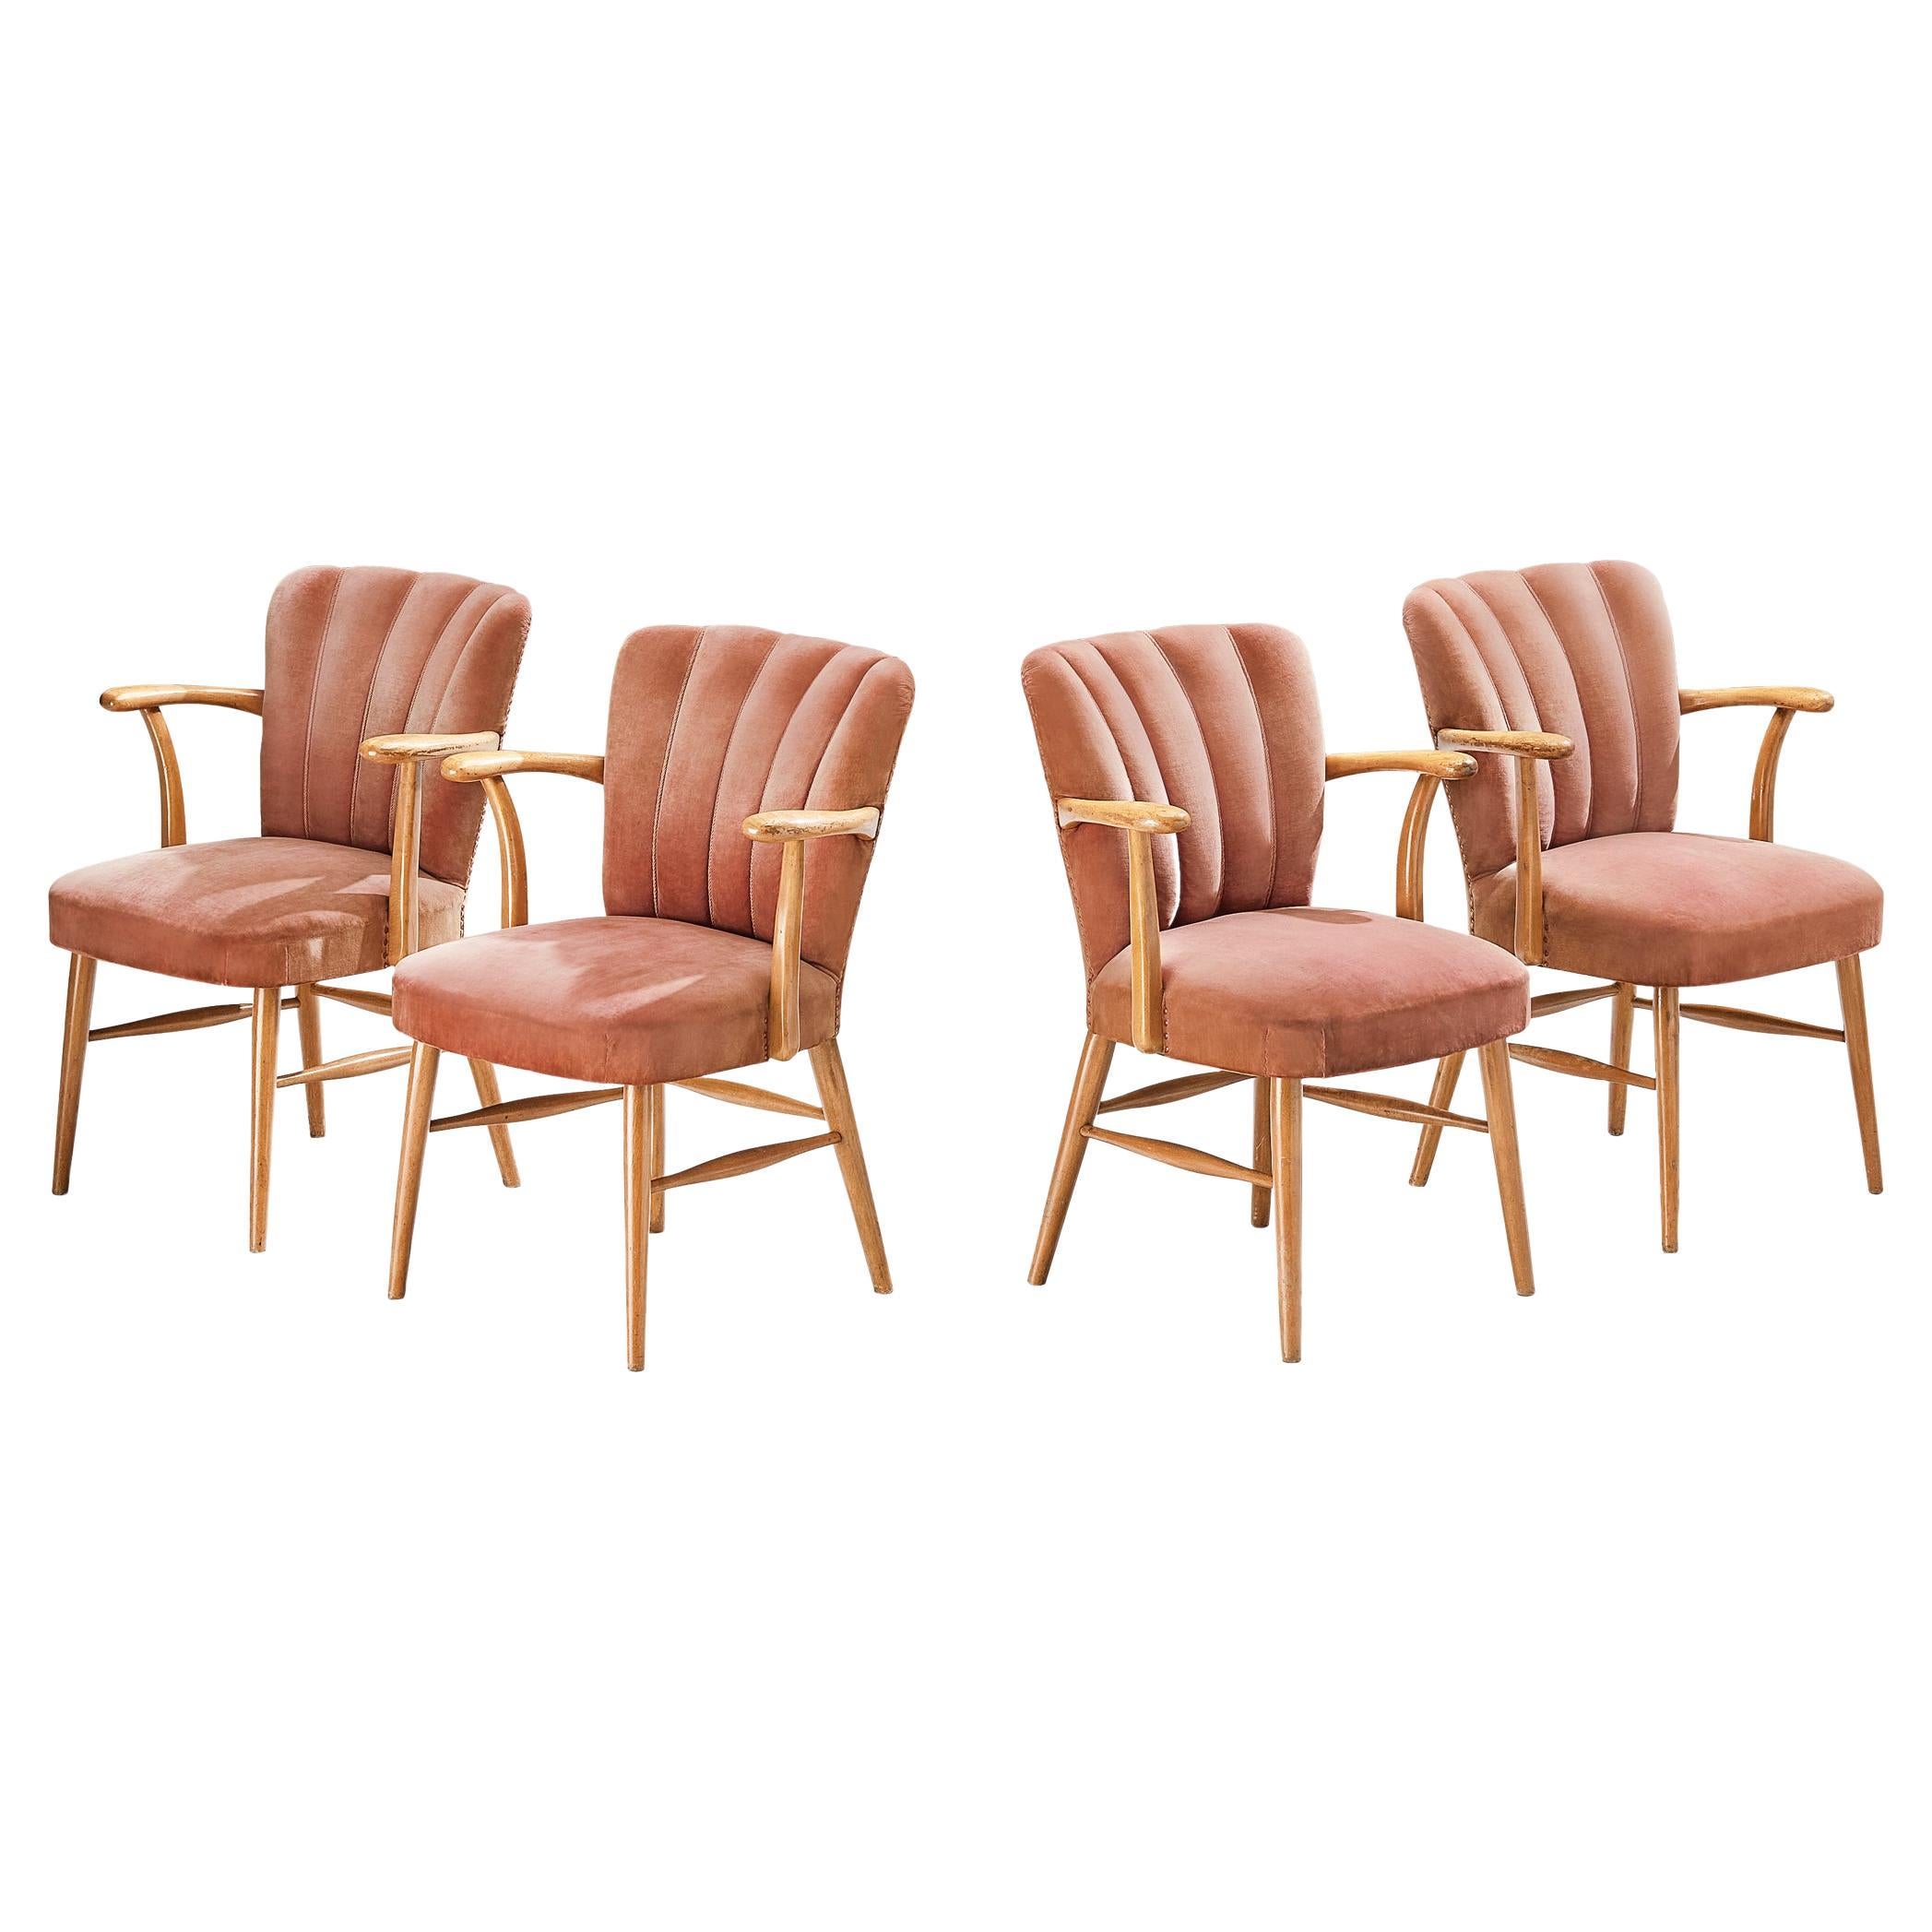 European Armchairs in Soft Pink Velvet Upholstery and Wood 